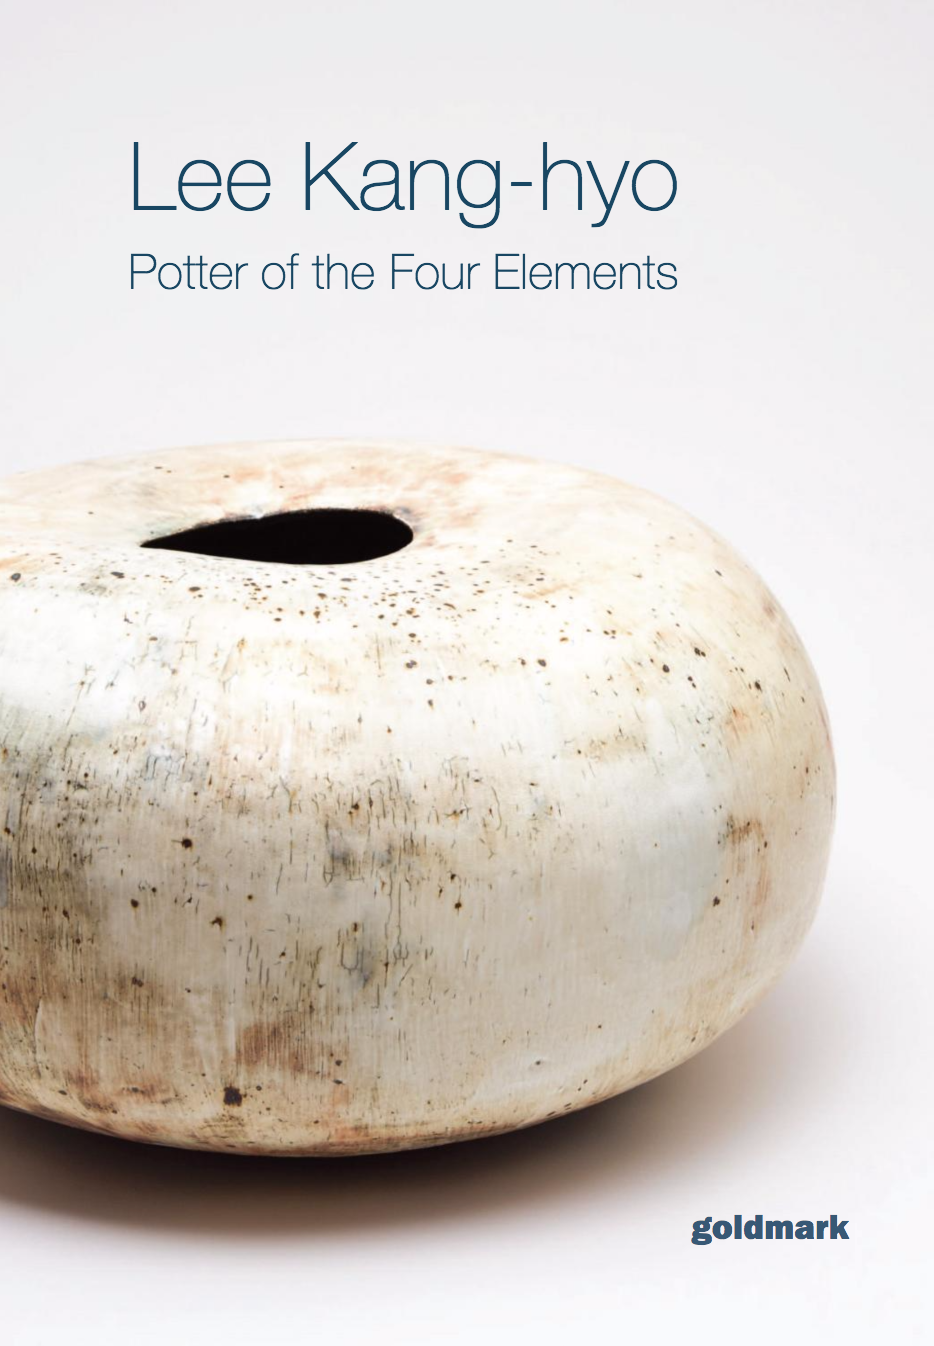 Lee Kang-hyo - Potter of the Four Elements